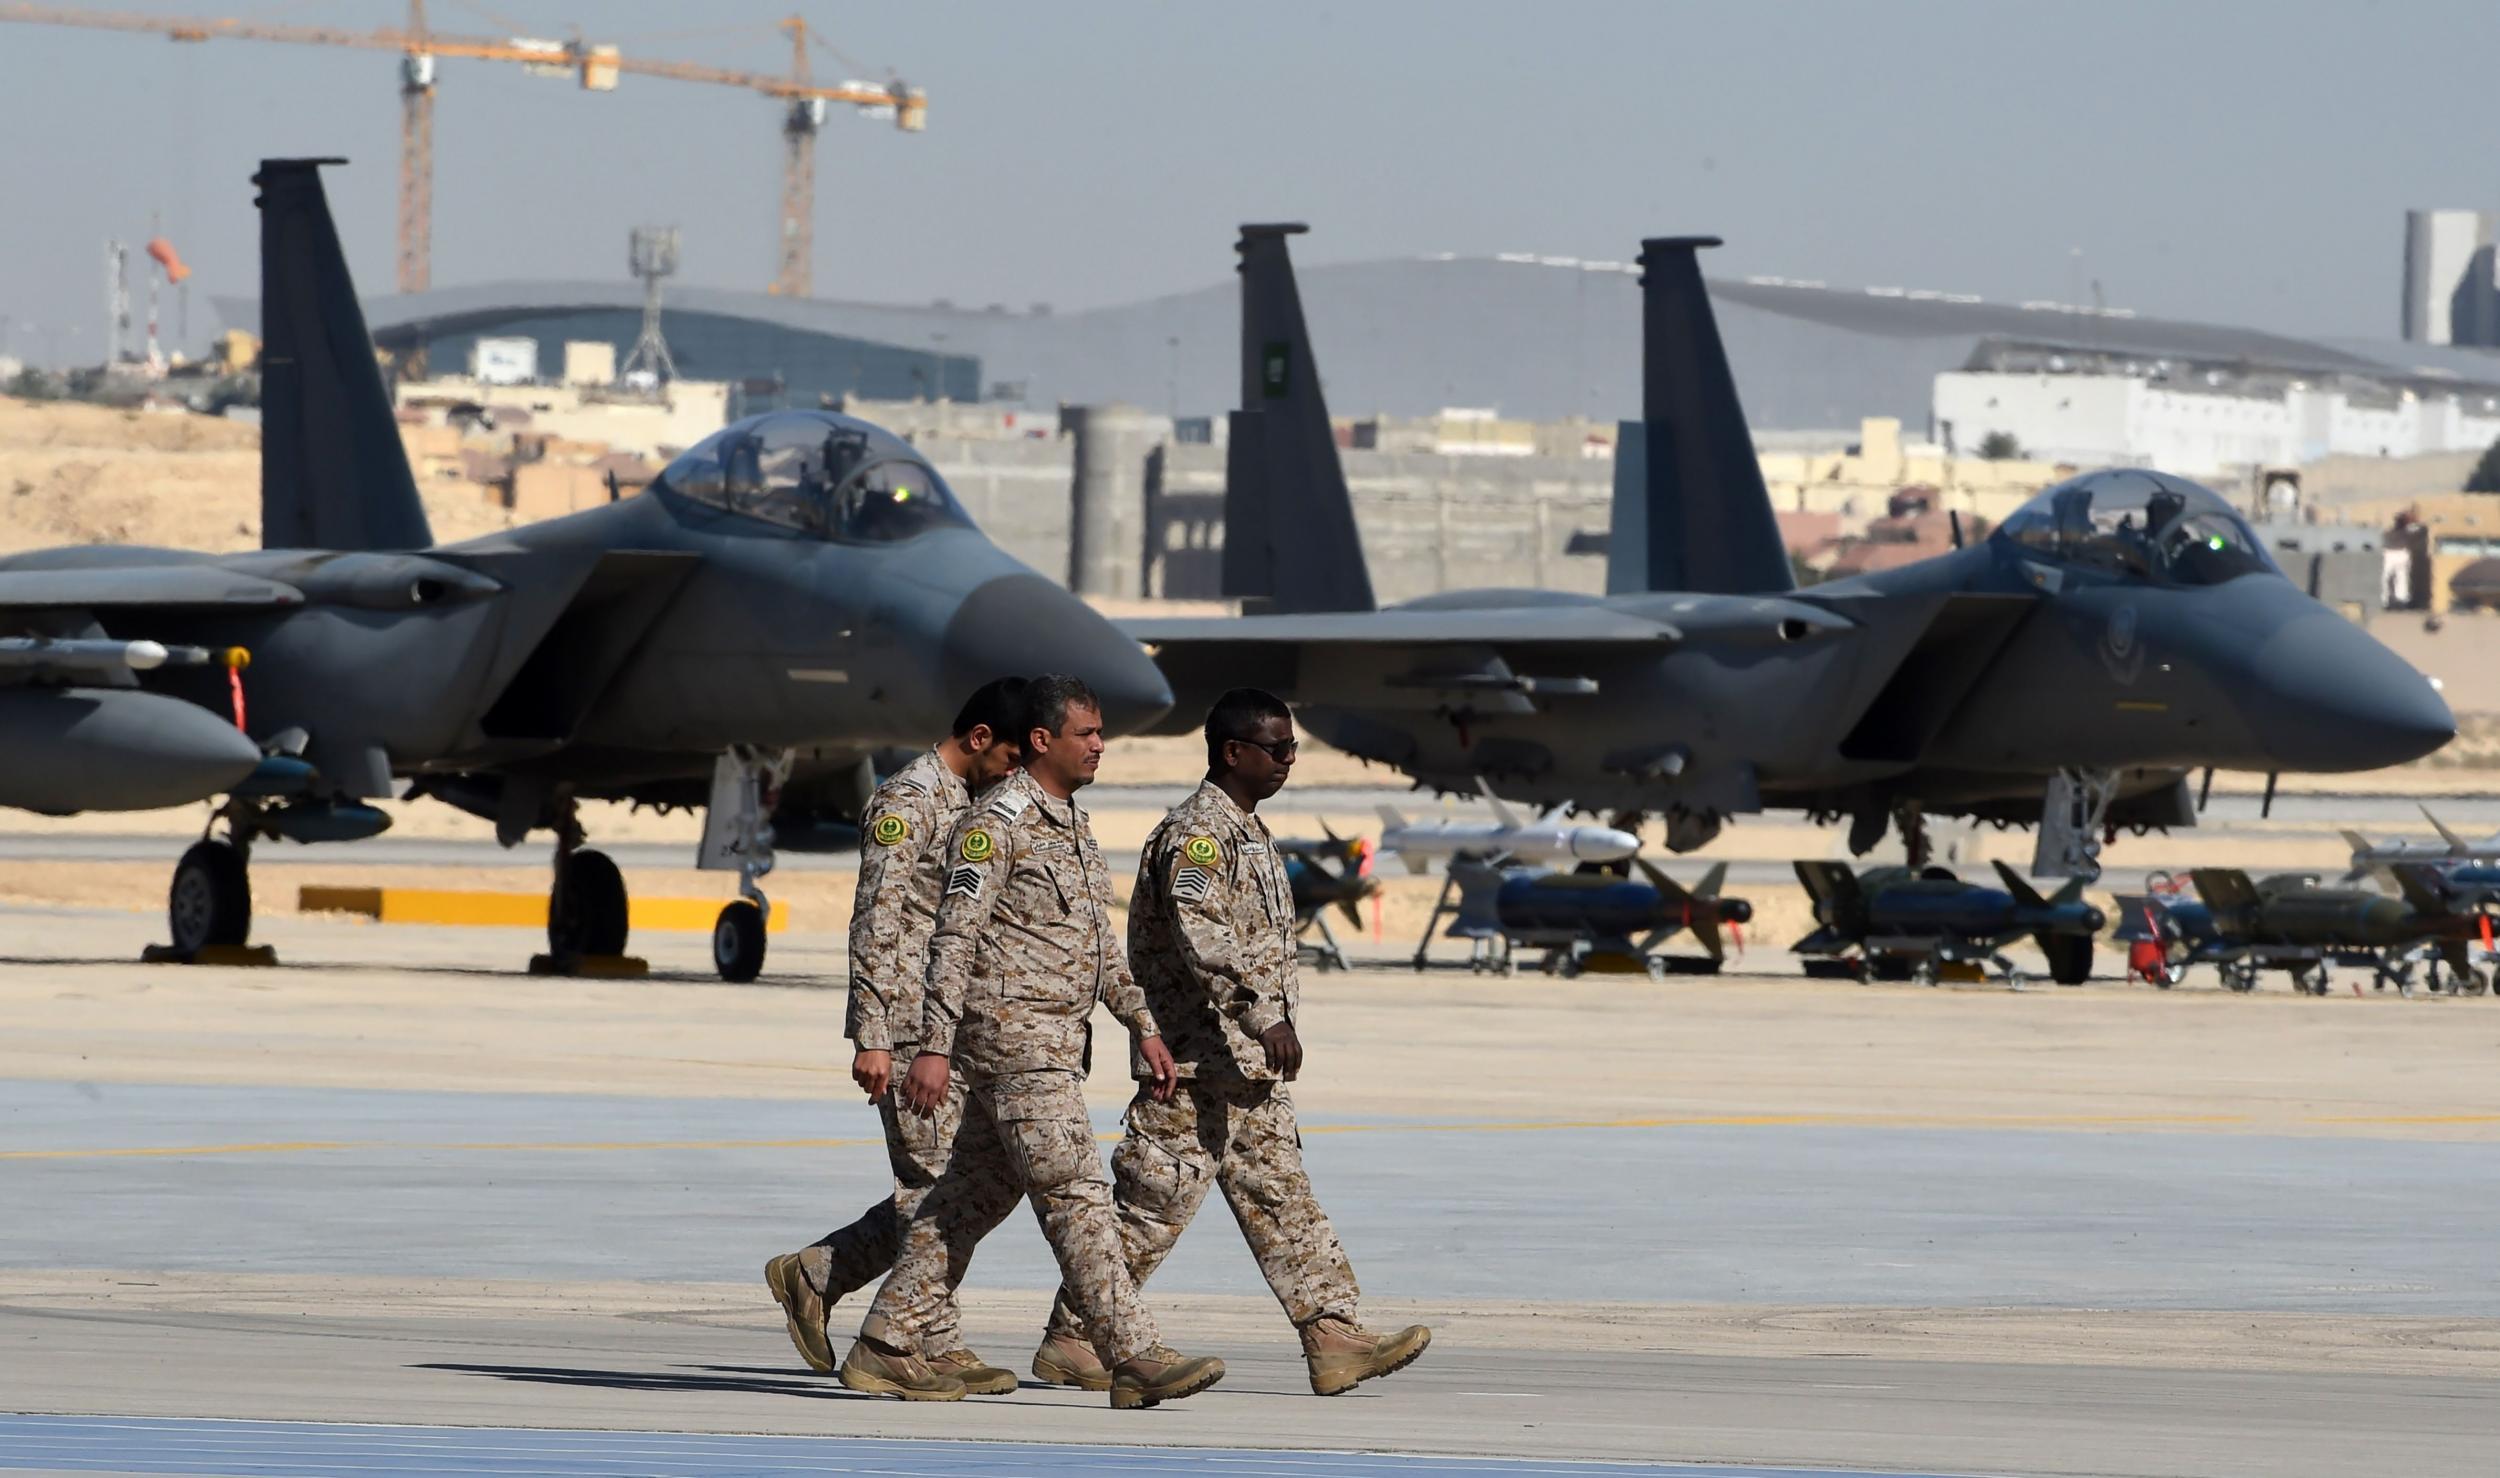 Saudi army officers walk past F-15 fighter jets, GBU bombs and missiles at King Salman airbase in Riyadh